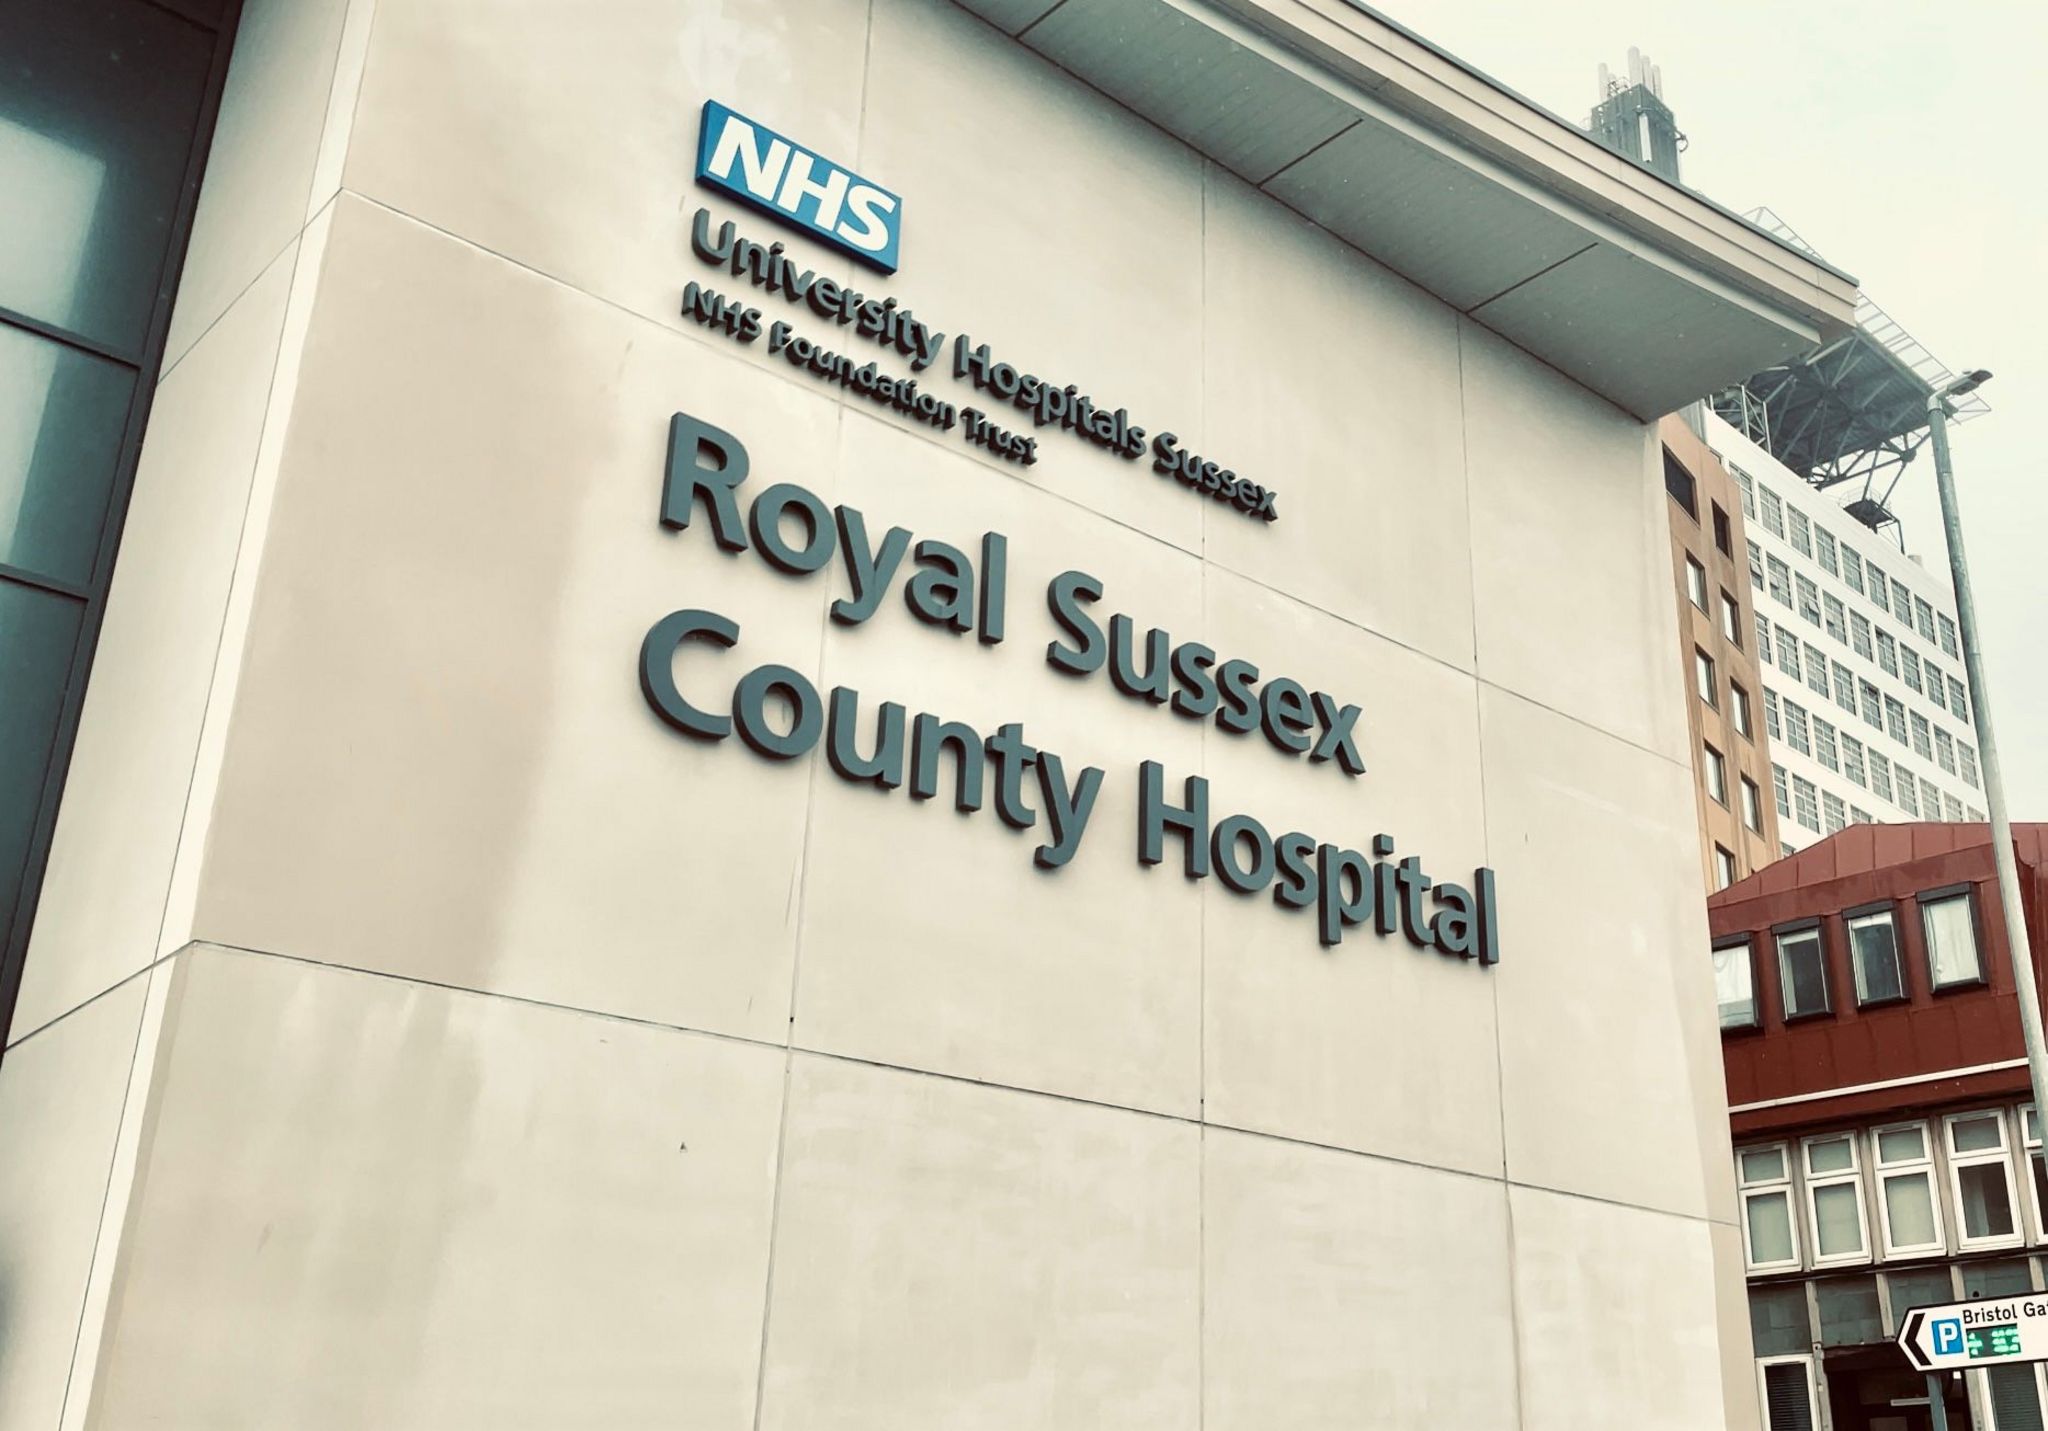 The Royal Sussex County Hospital